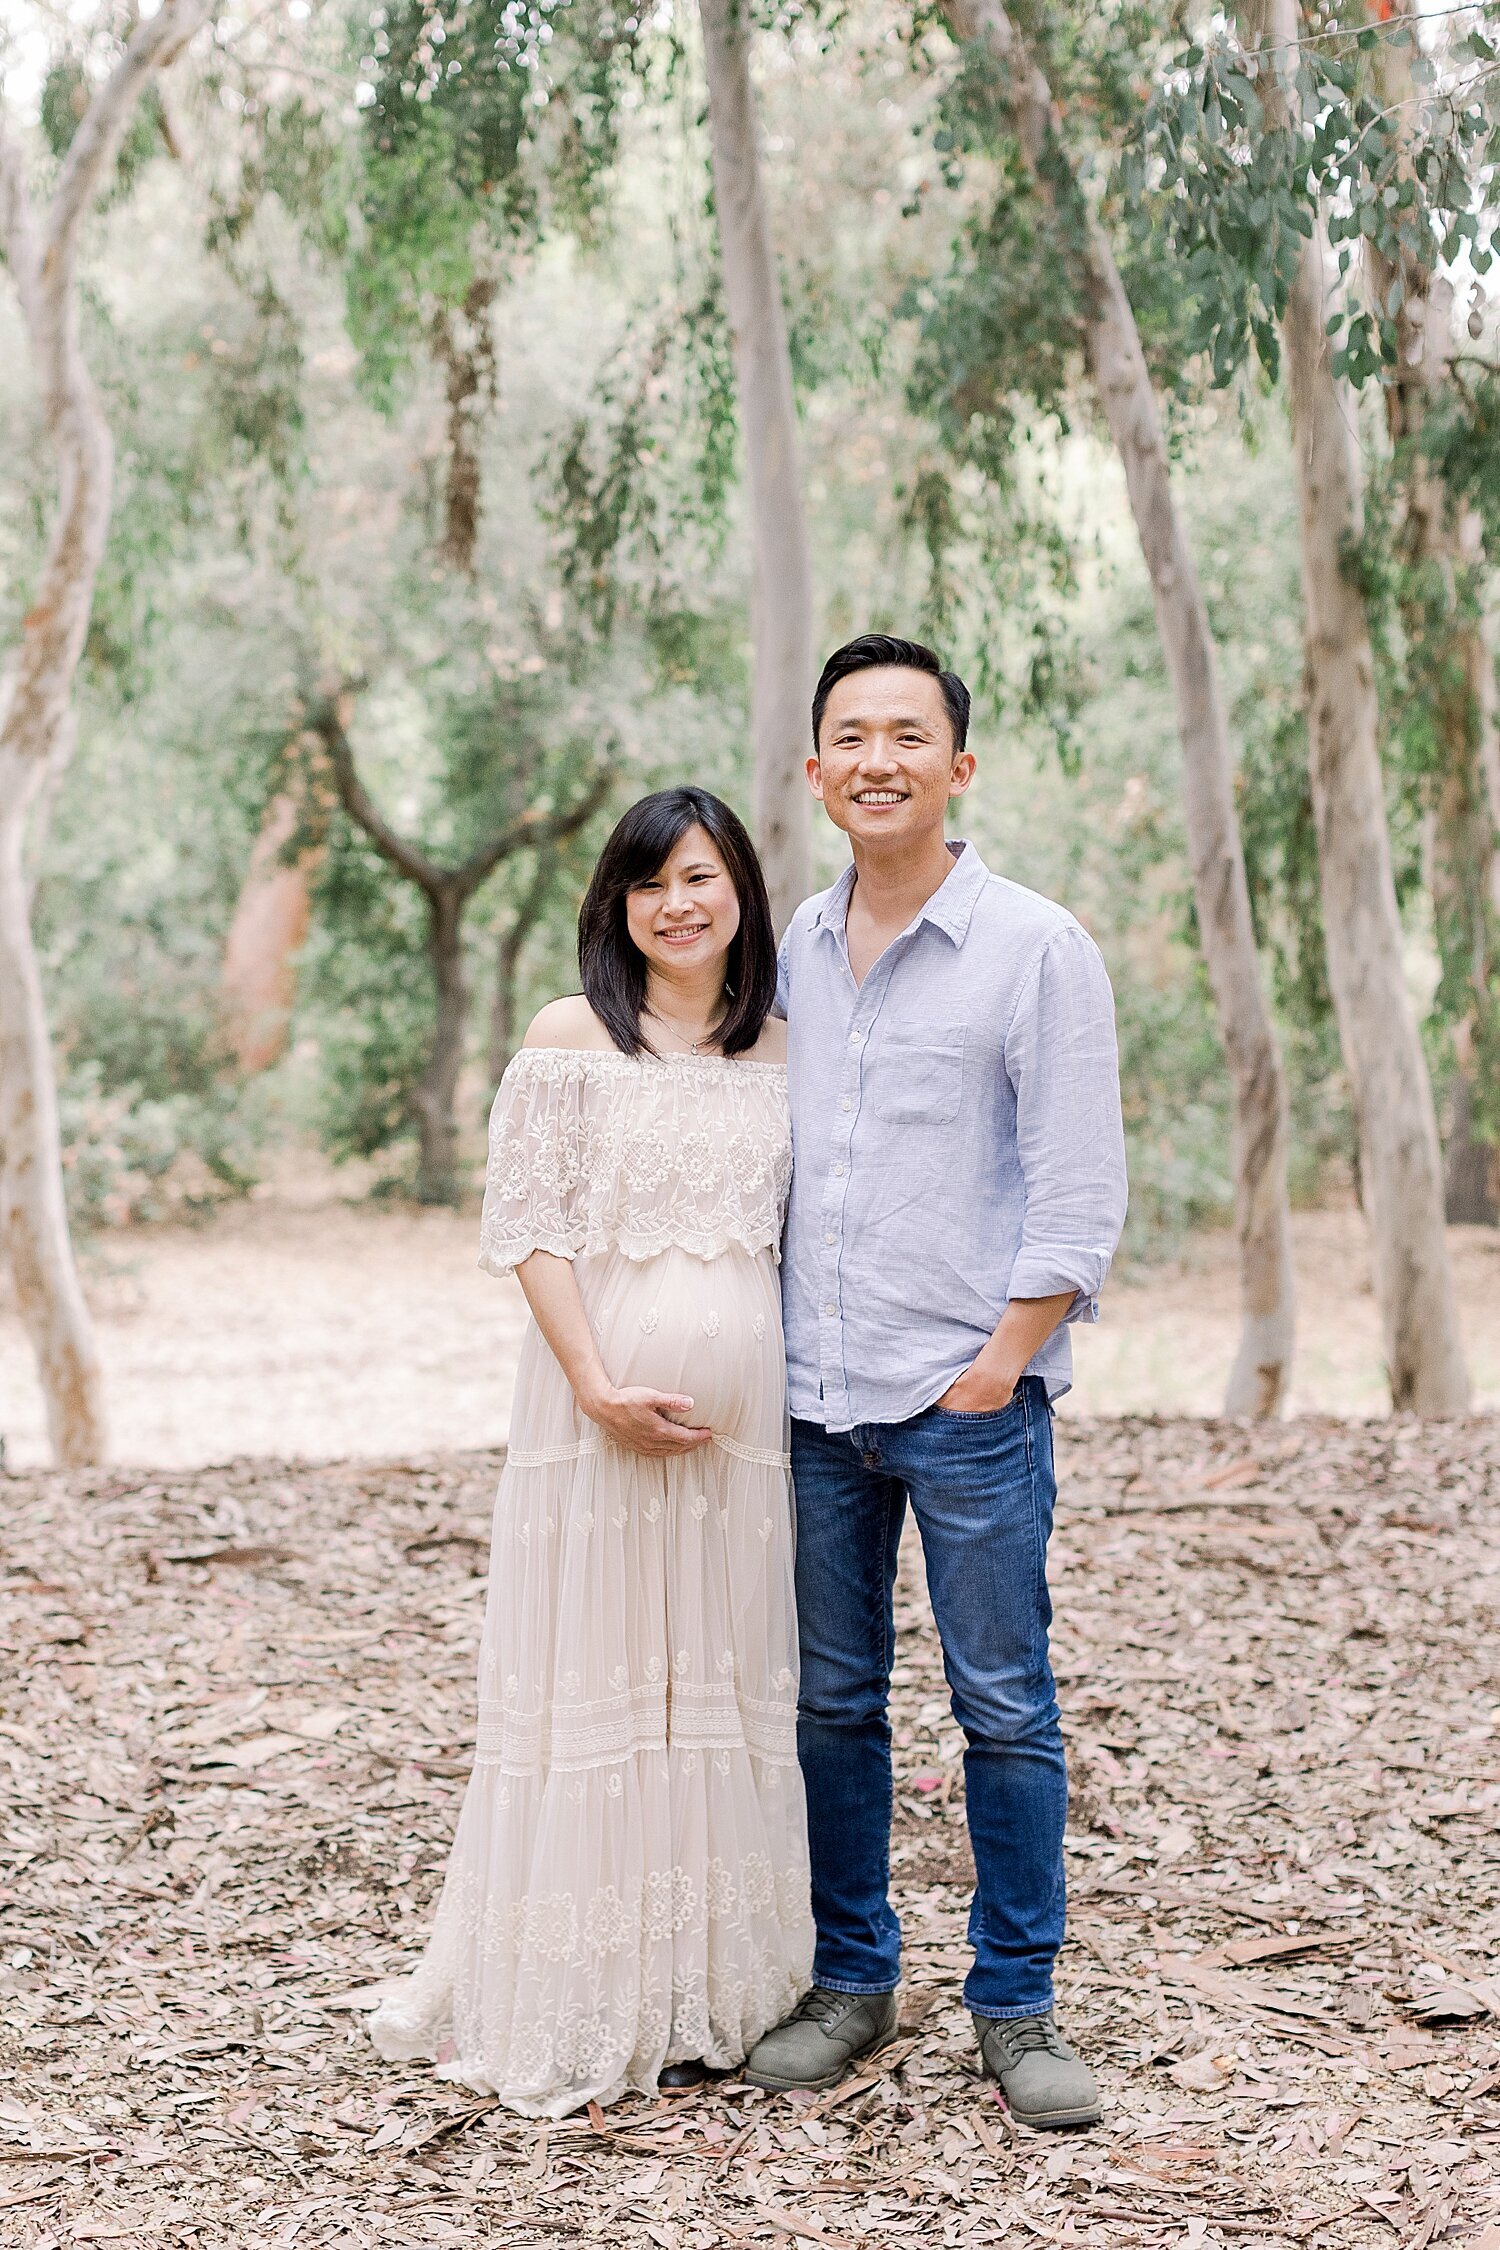 Outdoor maternity session in Orange County with Ambre Williams Photography.